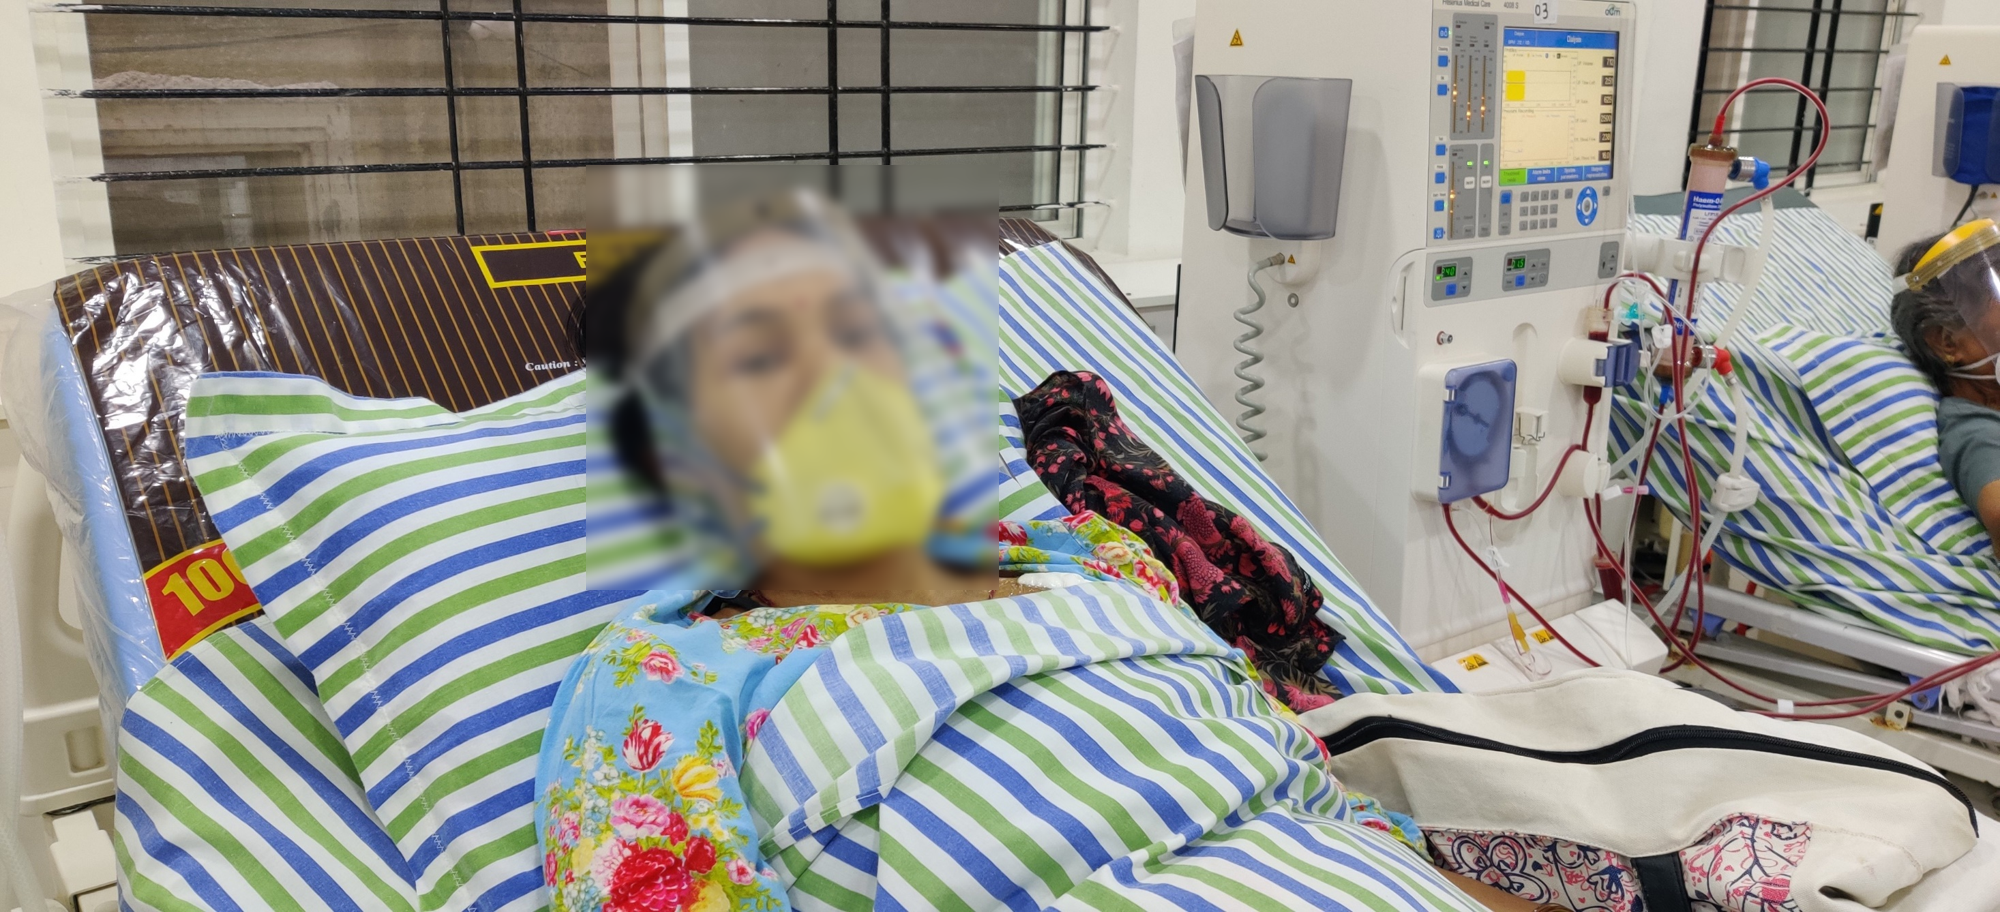 woman wearing a mask whose face is blurred sleeping on the hospital bed